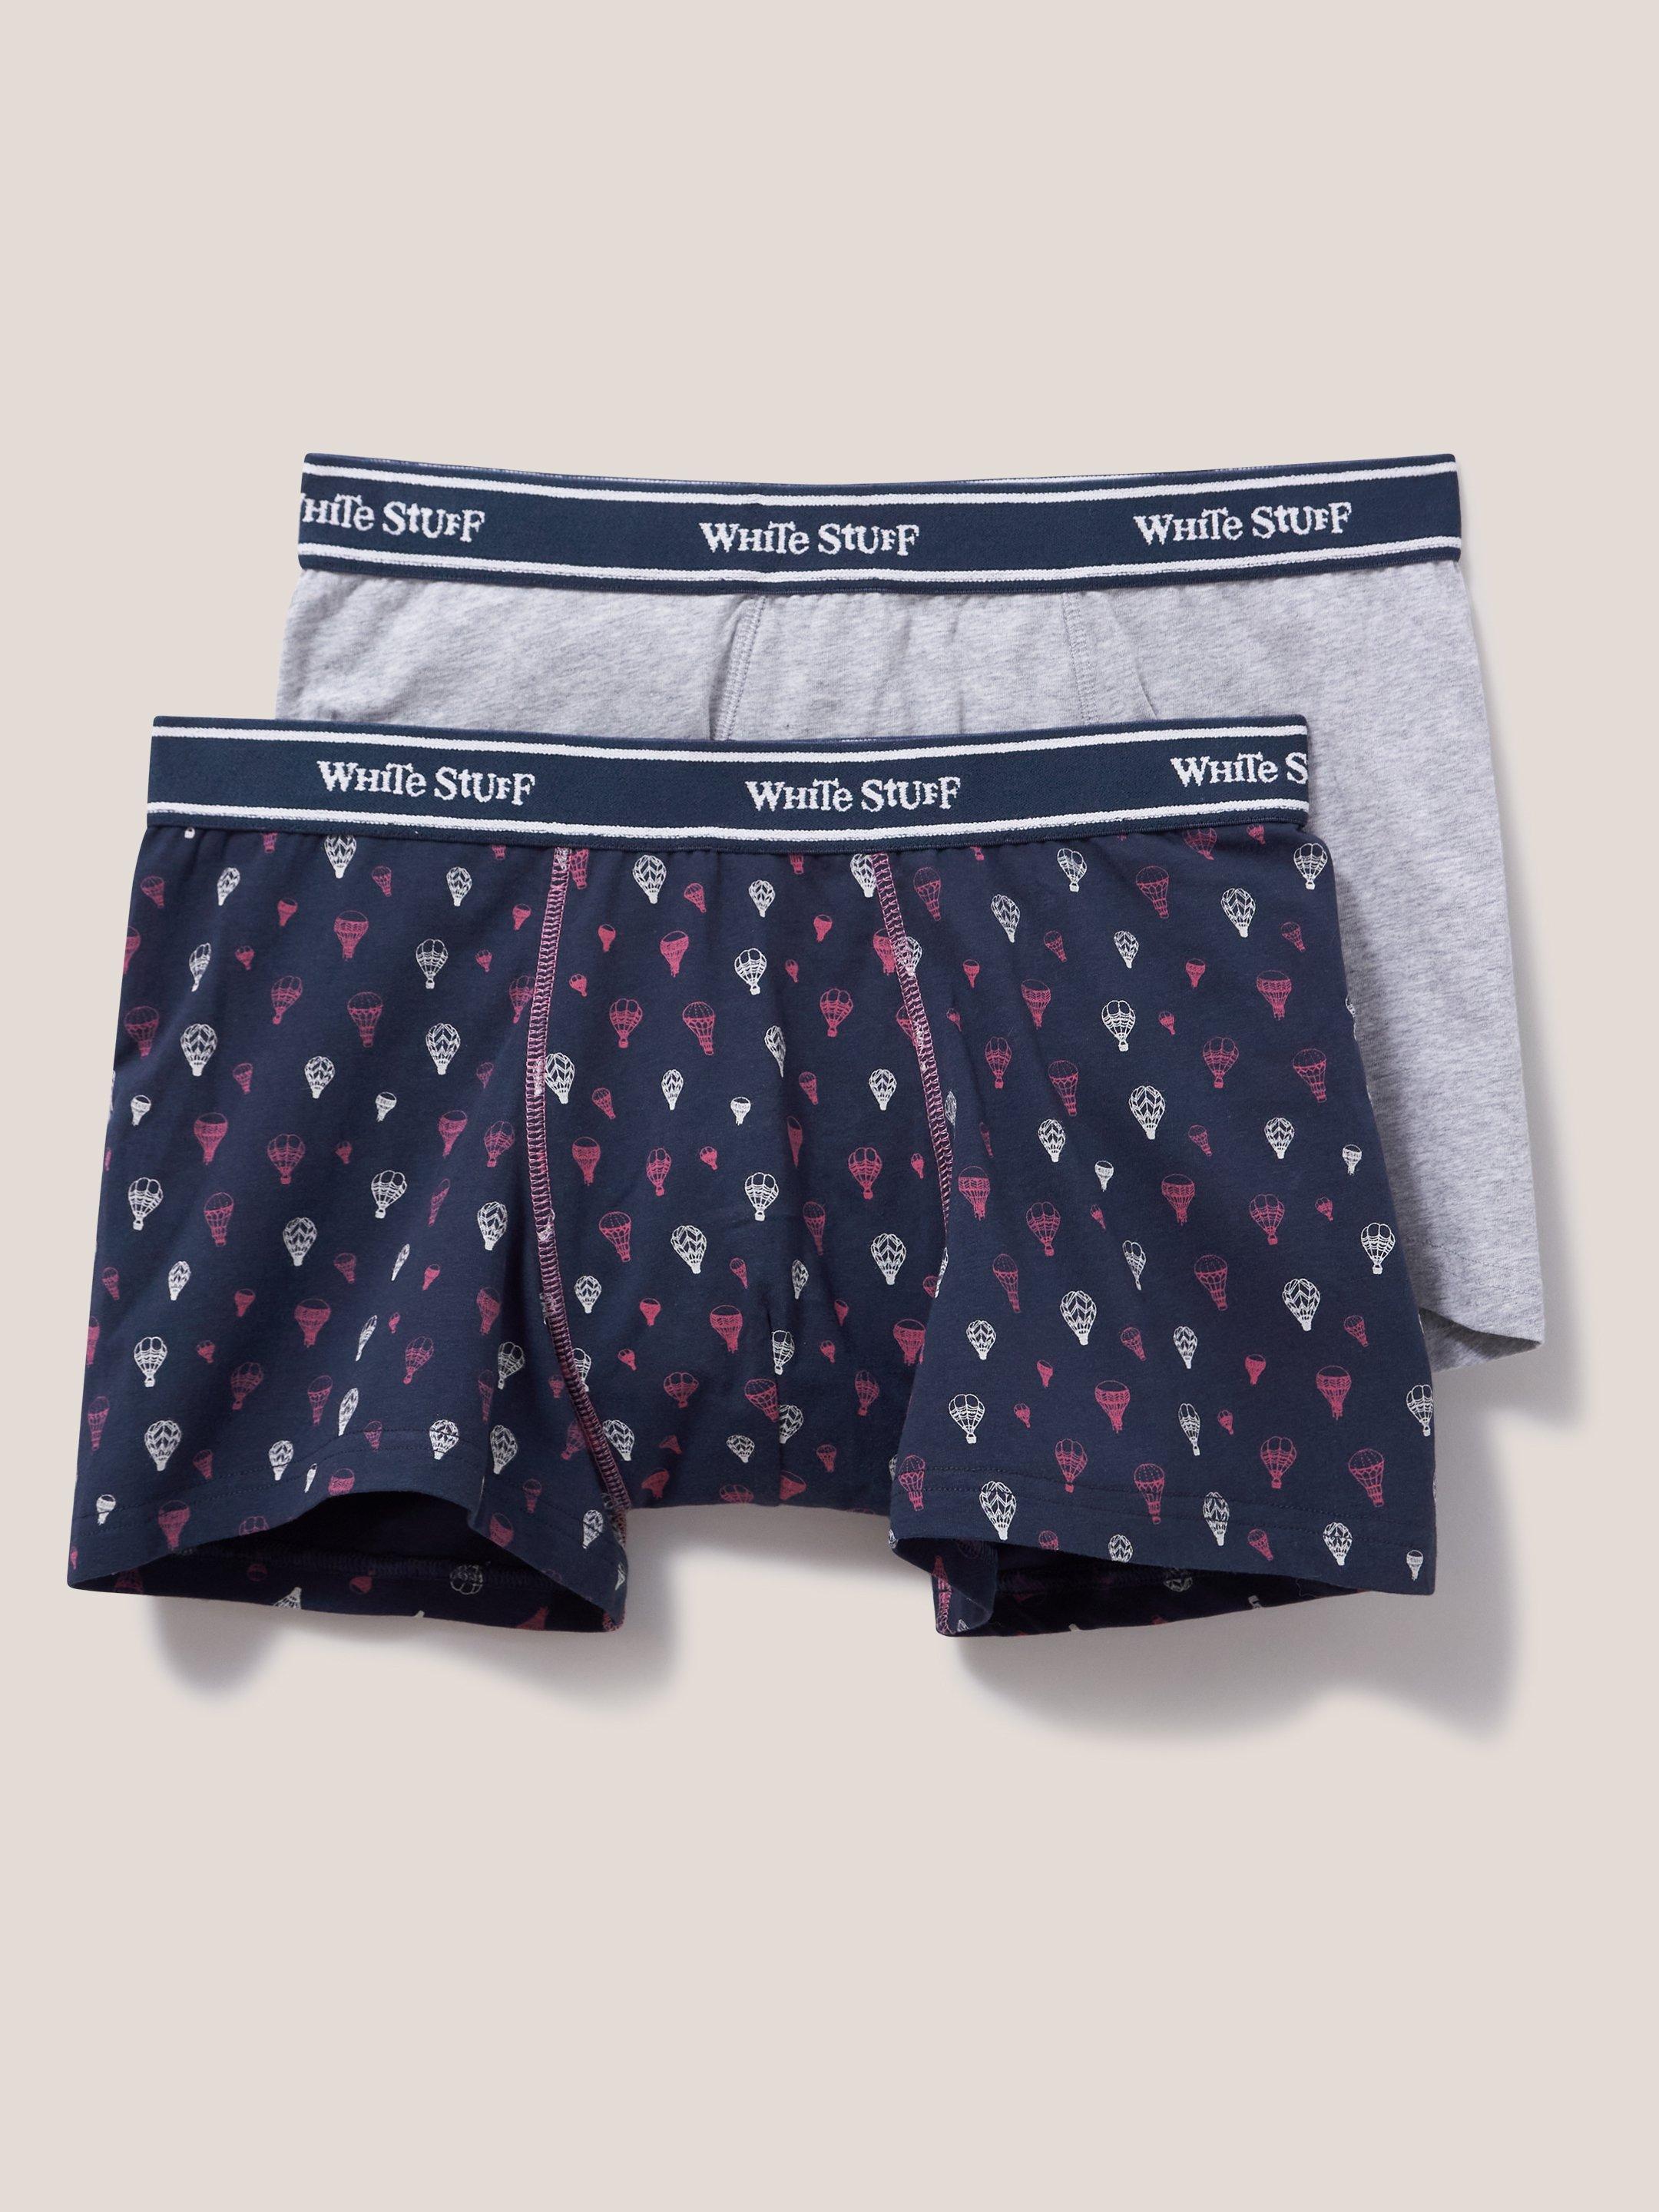 2 Pack Boxers Plain and Print